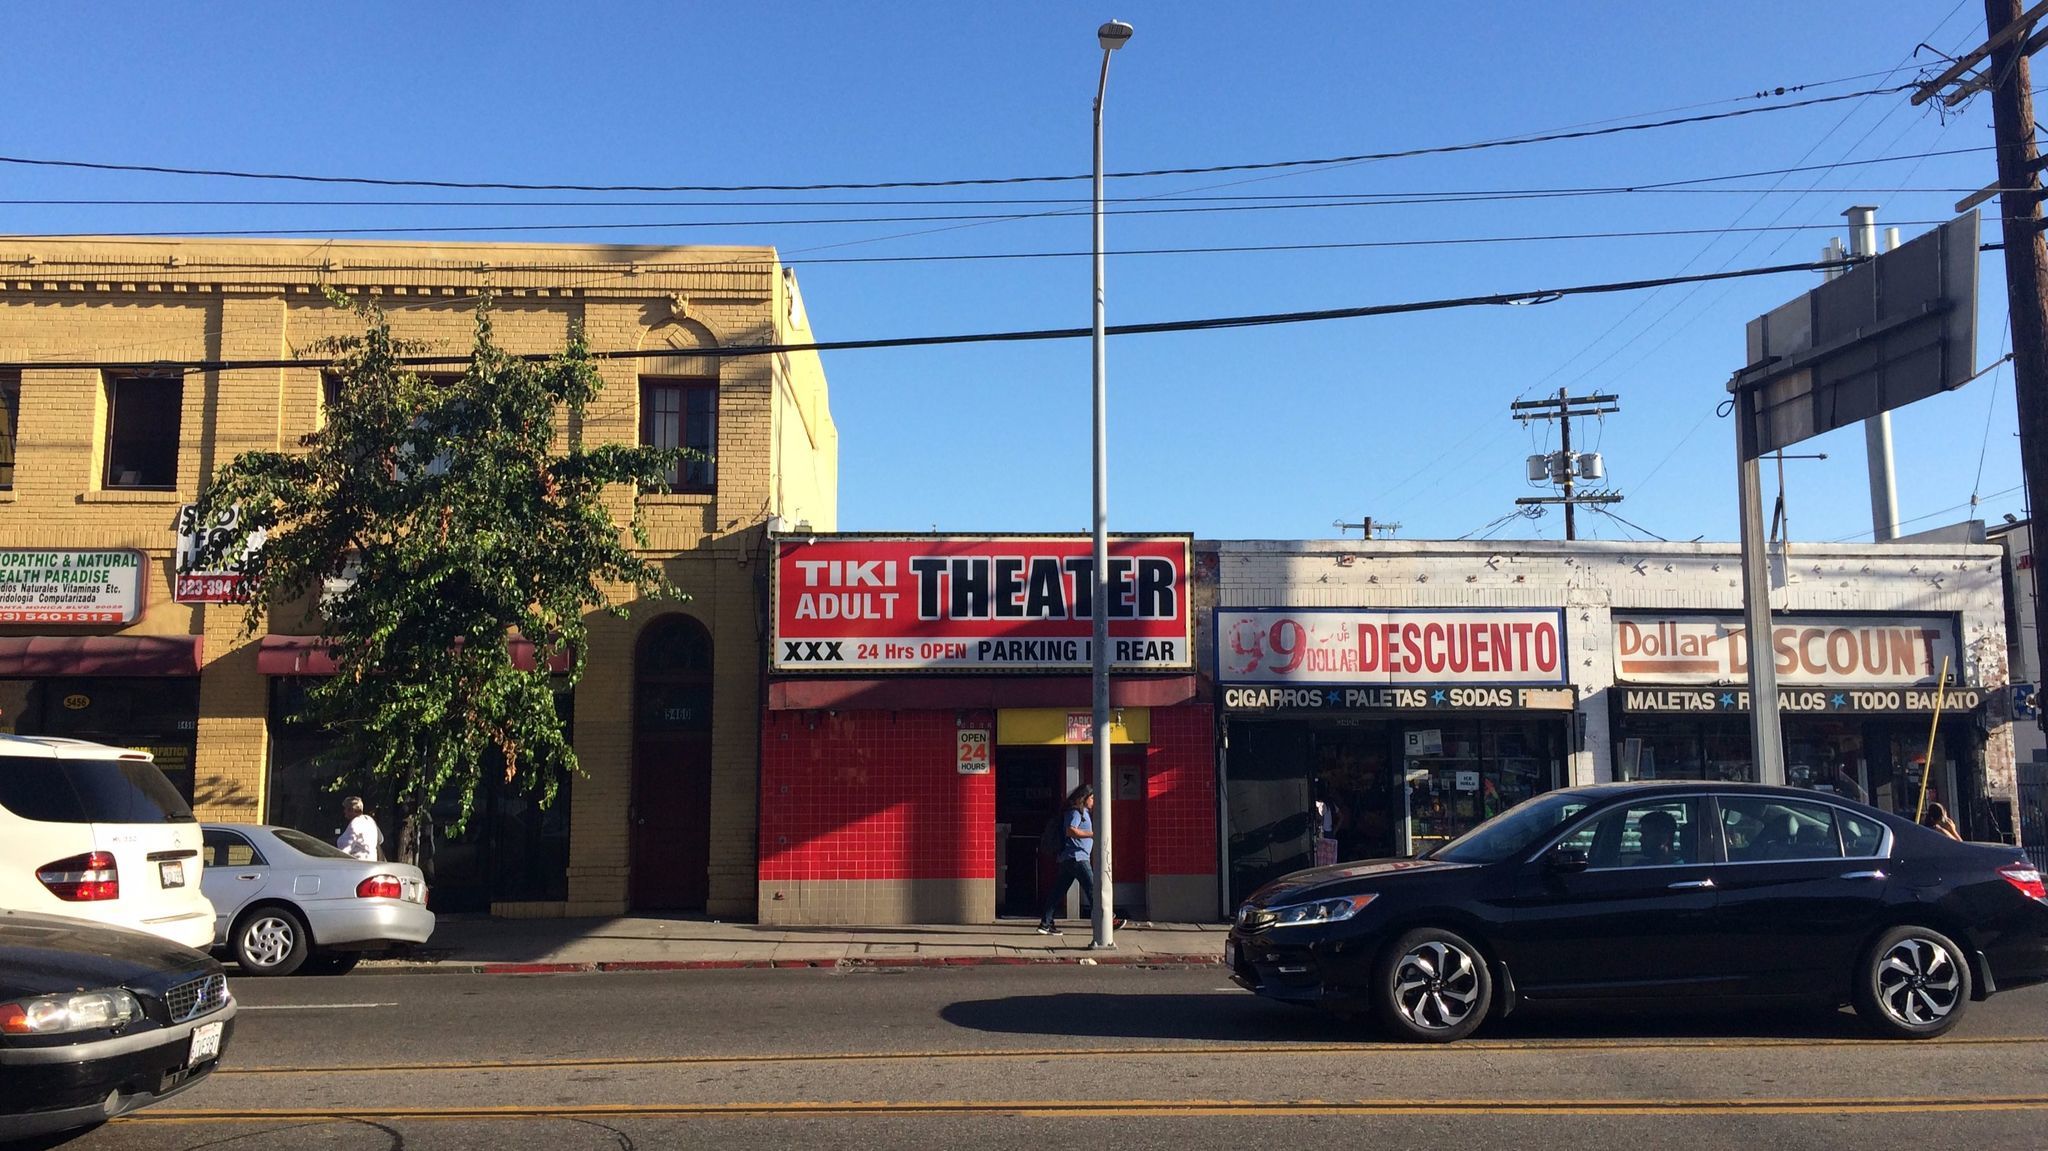 A view of the Tiki theater in Hollywood, one of two surviving adult theaters in Los Angeles.